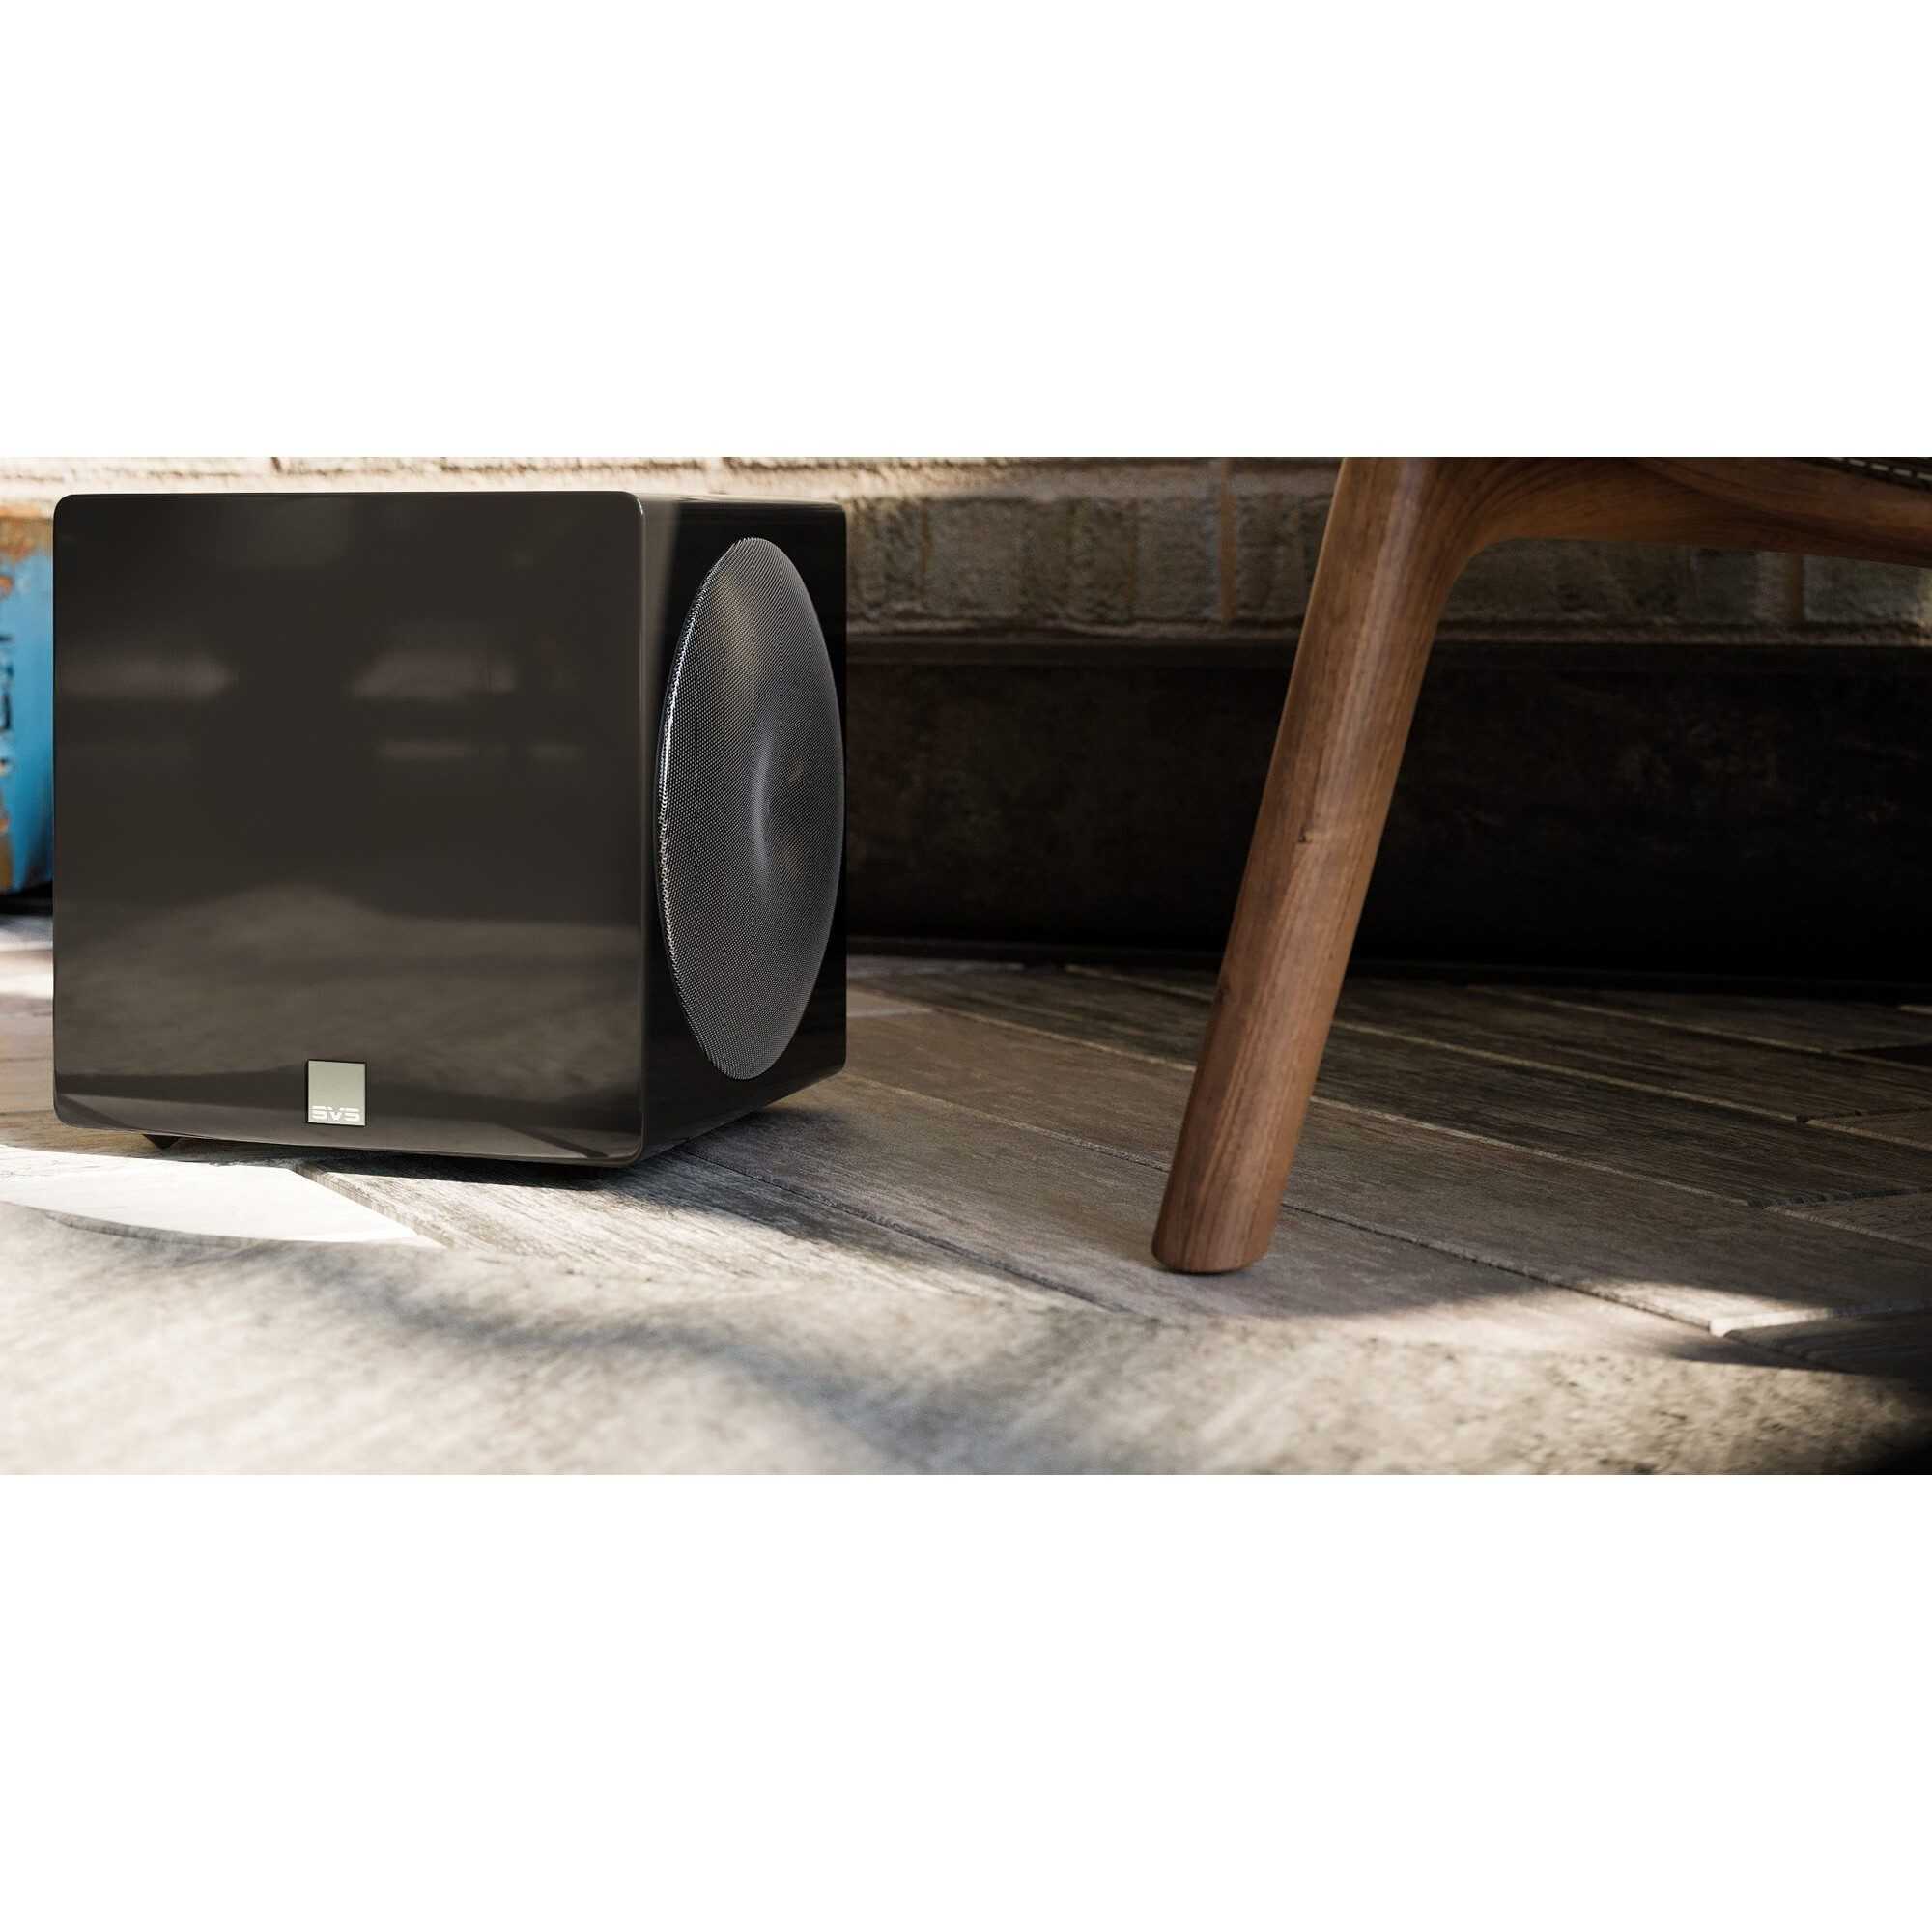 Svs  - 3000 micro subwoofer